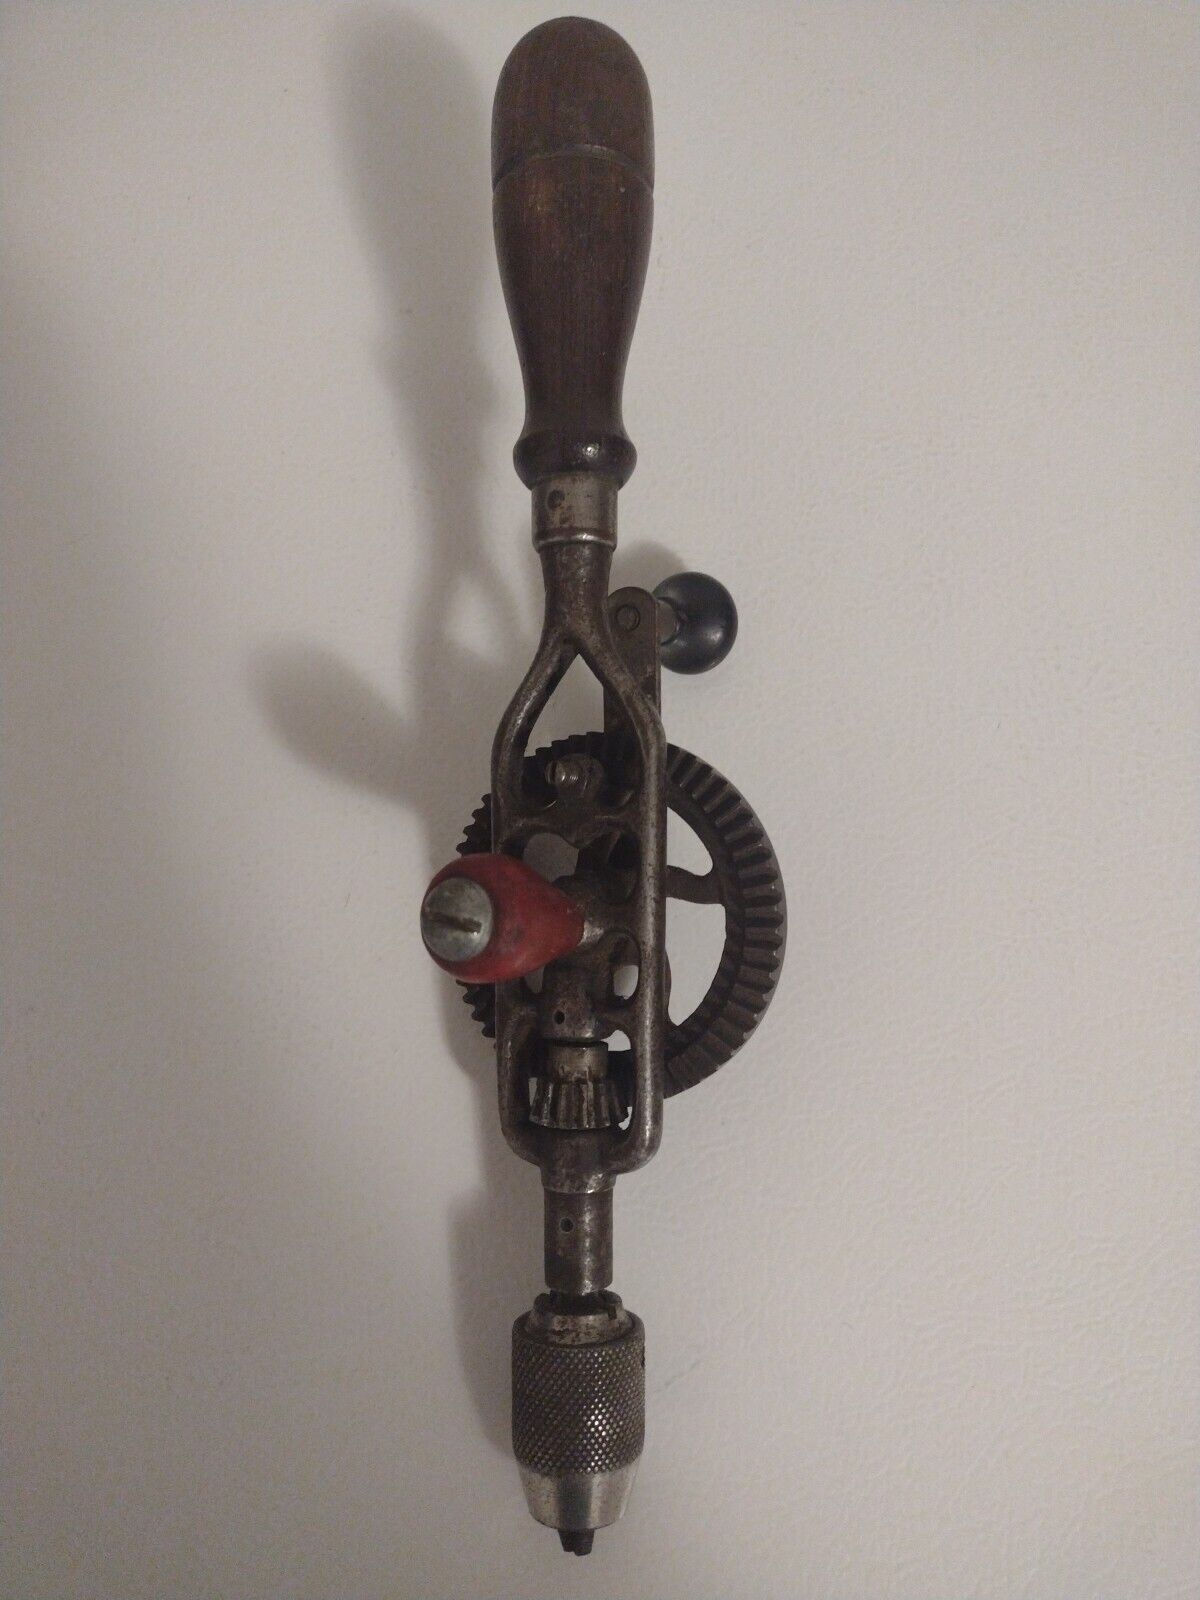 Vintage Millers Falls No. 1 Hand Drill, Egg Beater Drill